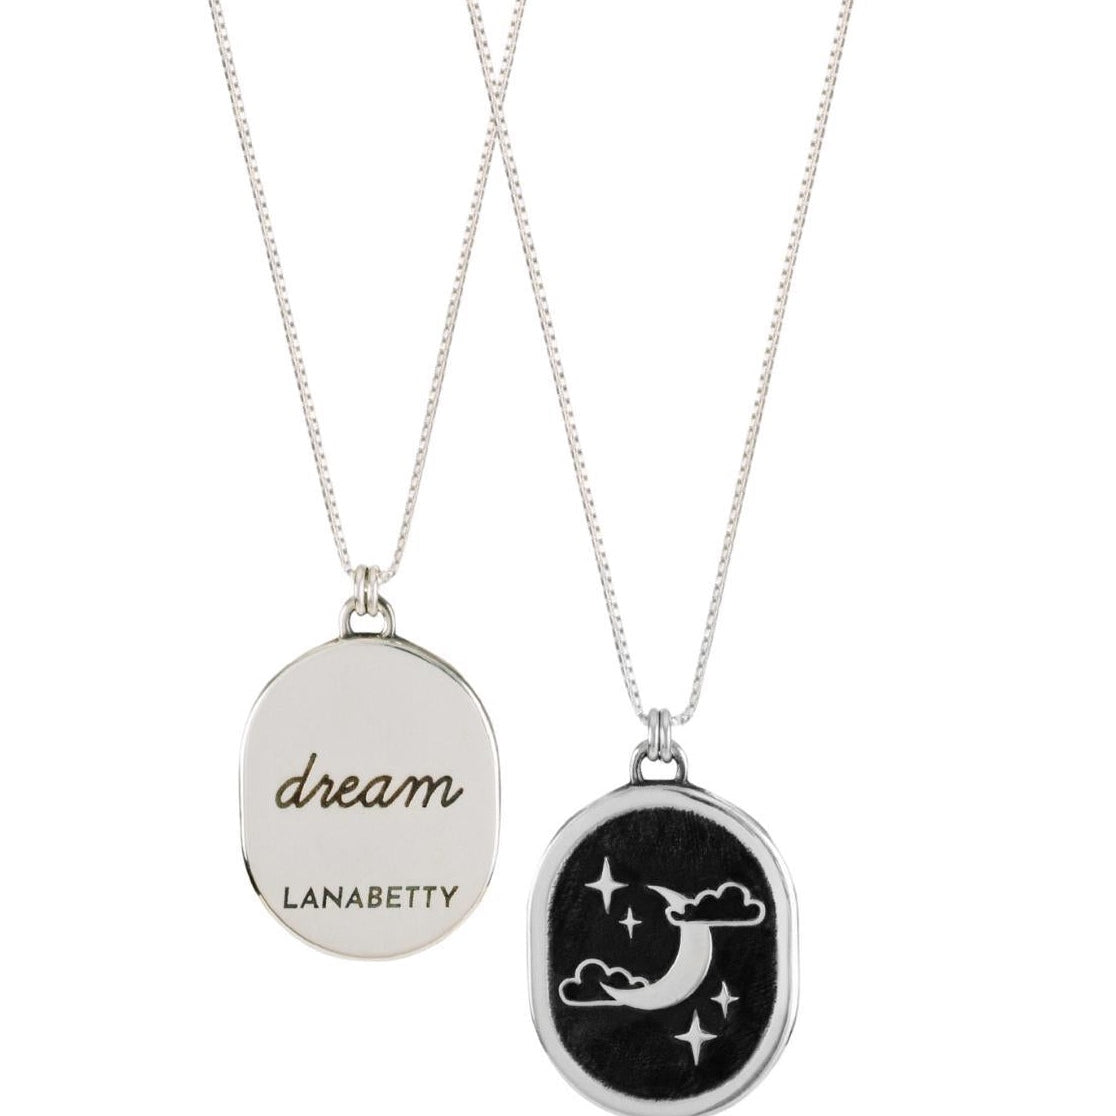 Dream Sterling Silver Mantra Necklace with 20" chain by Lanabetty